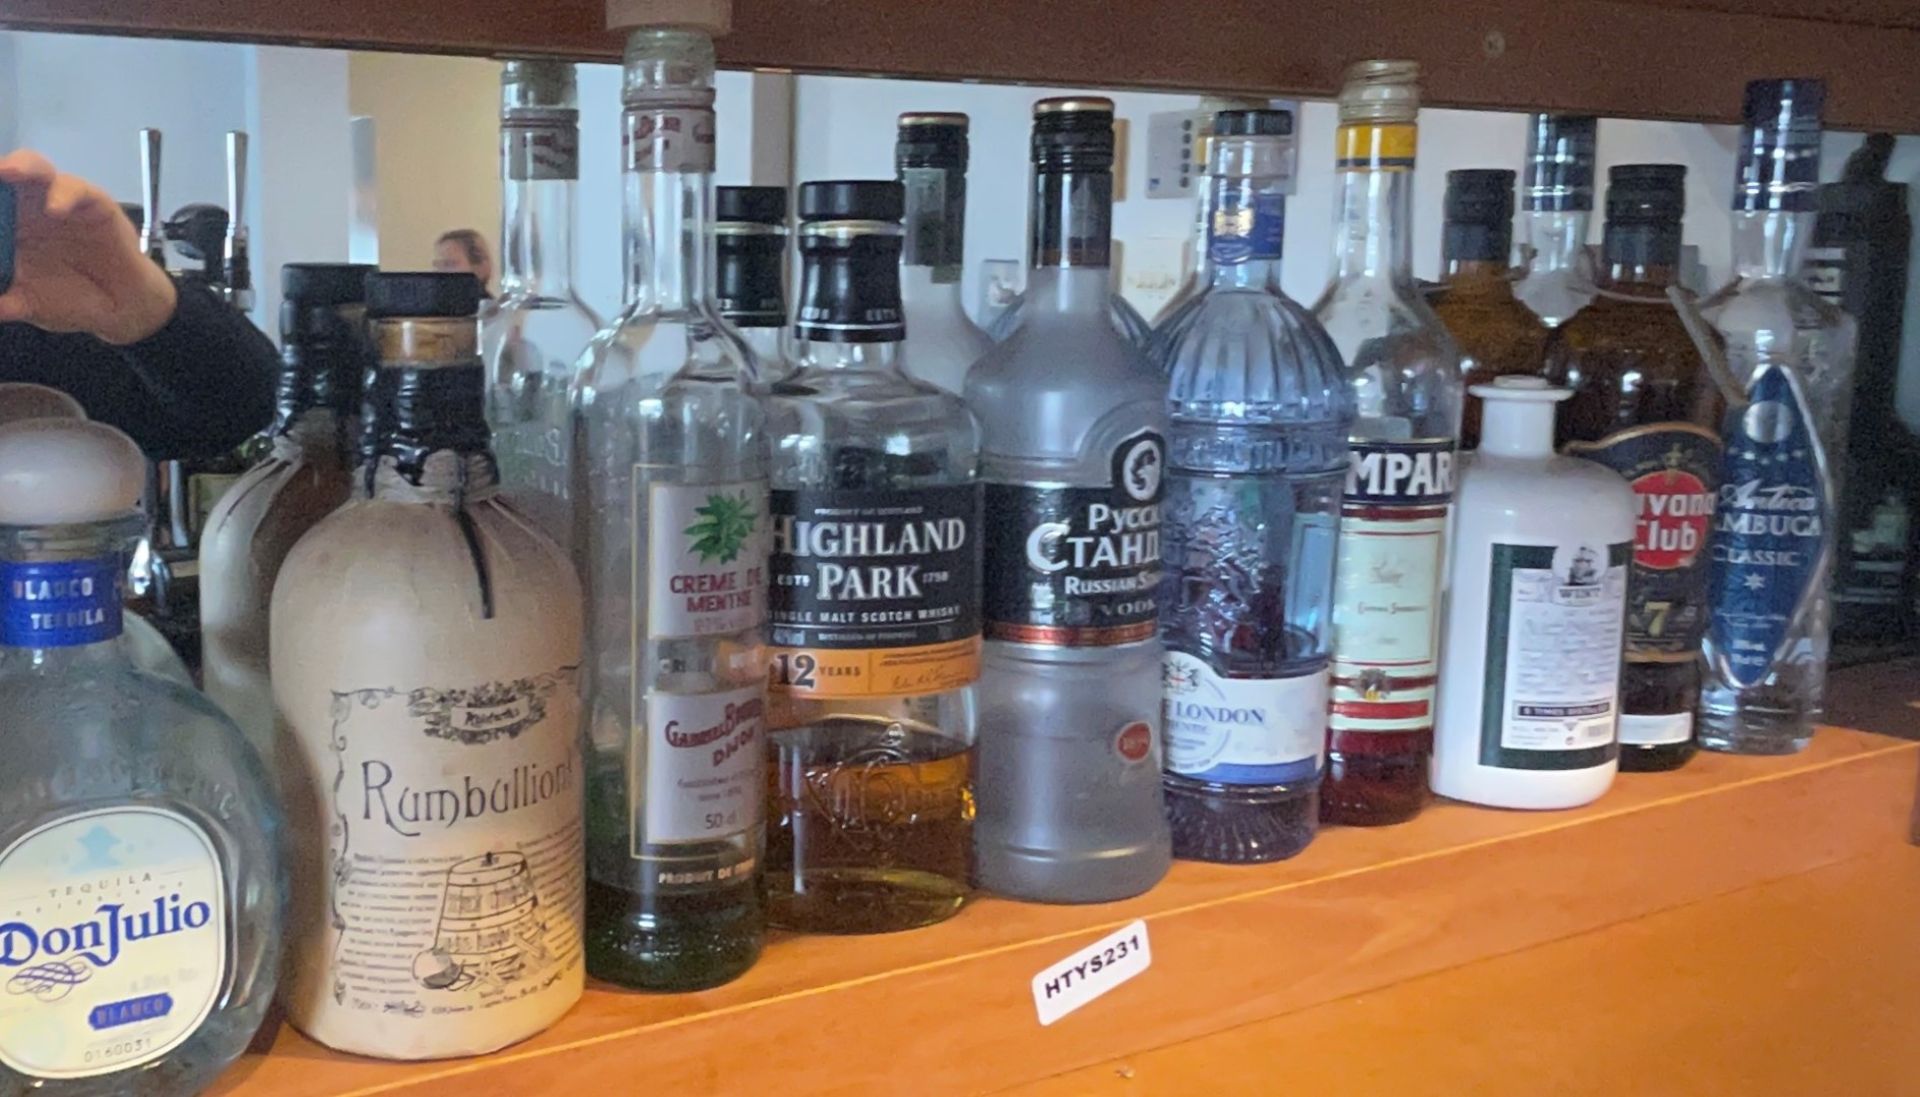 13 x Bottles of Various Spirits Including Sambuca, Vodka, Whisky, Gin, Rum and More - Part Used Open - Image 13 of 14